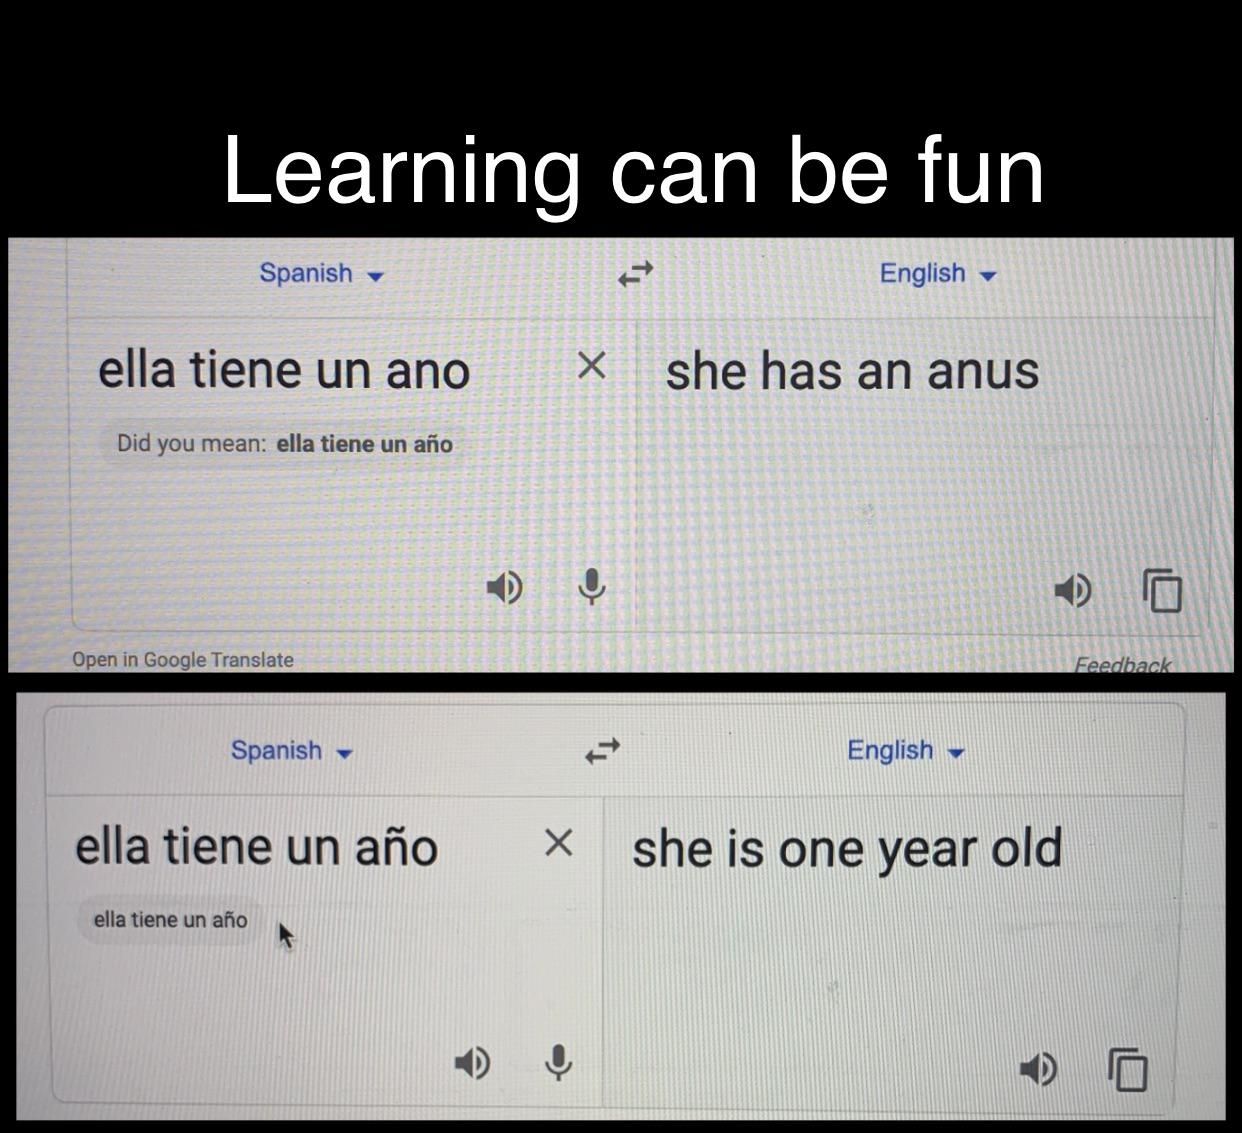 I’m learning Spanish right now and thought this was pretty funny, thank you Google Translate